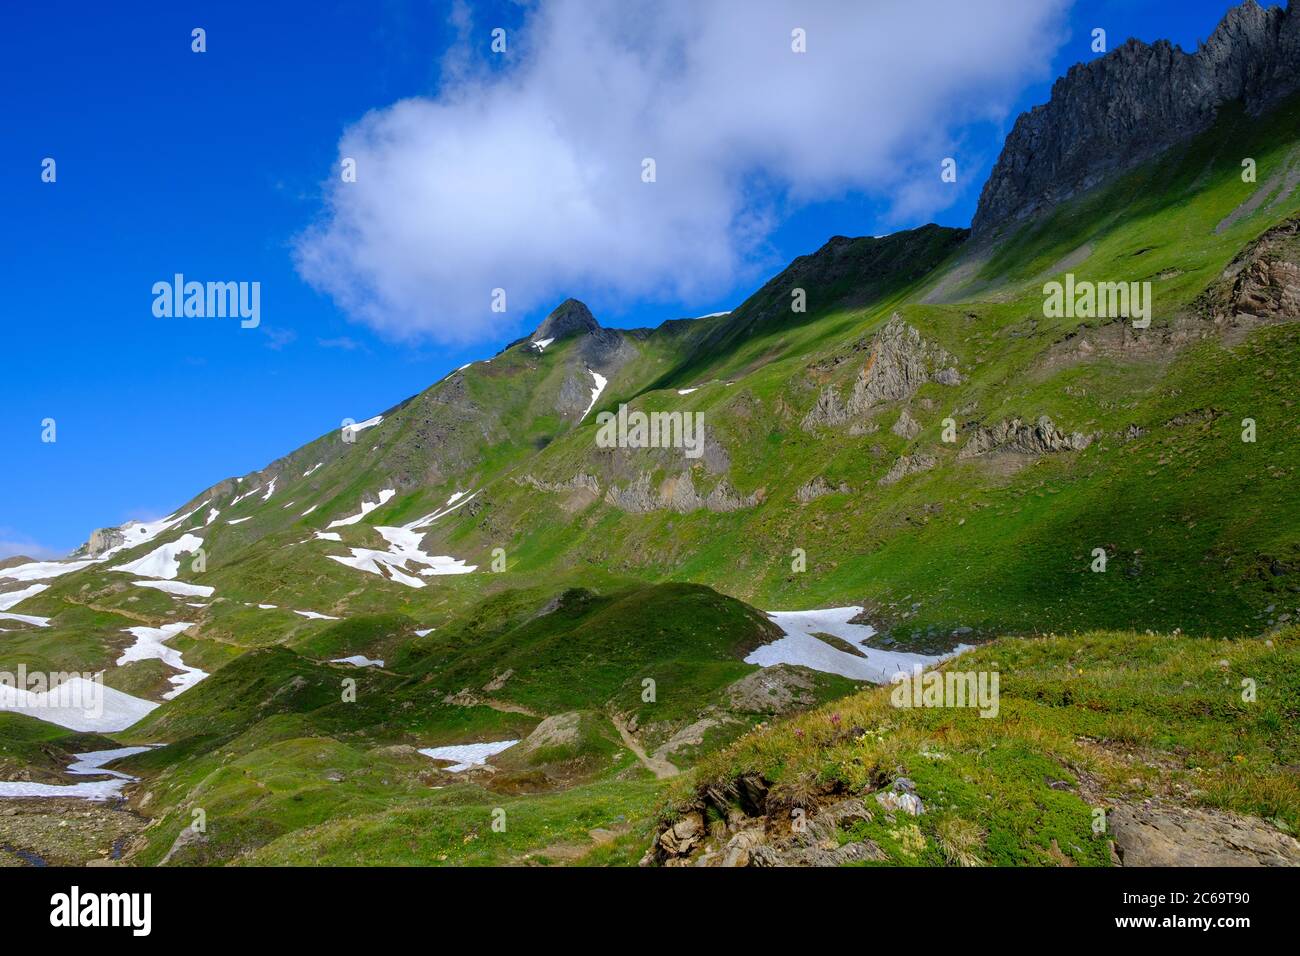 View of the Nuefenenstock on the way to the Gries hut, Switzerland Stock Photo